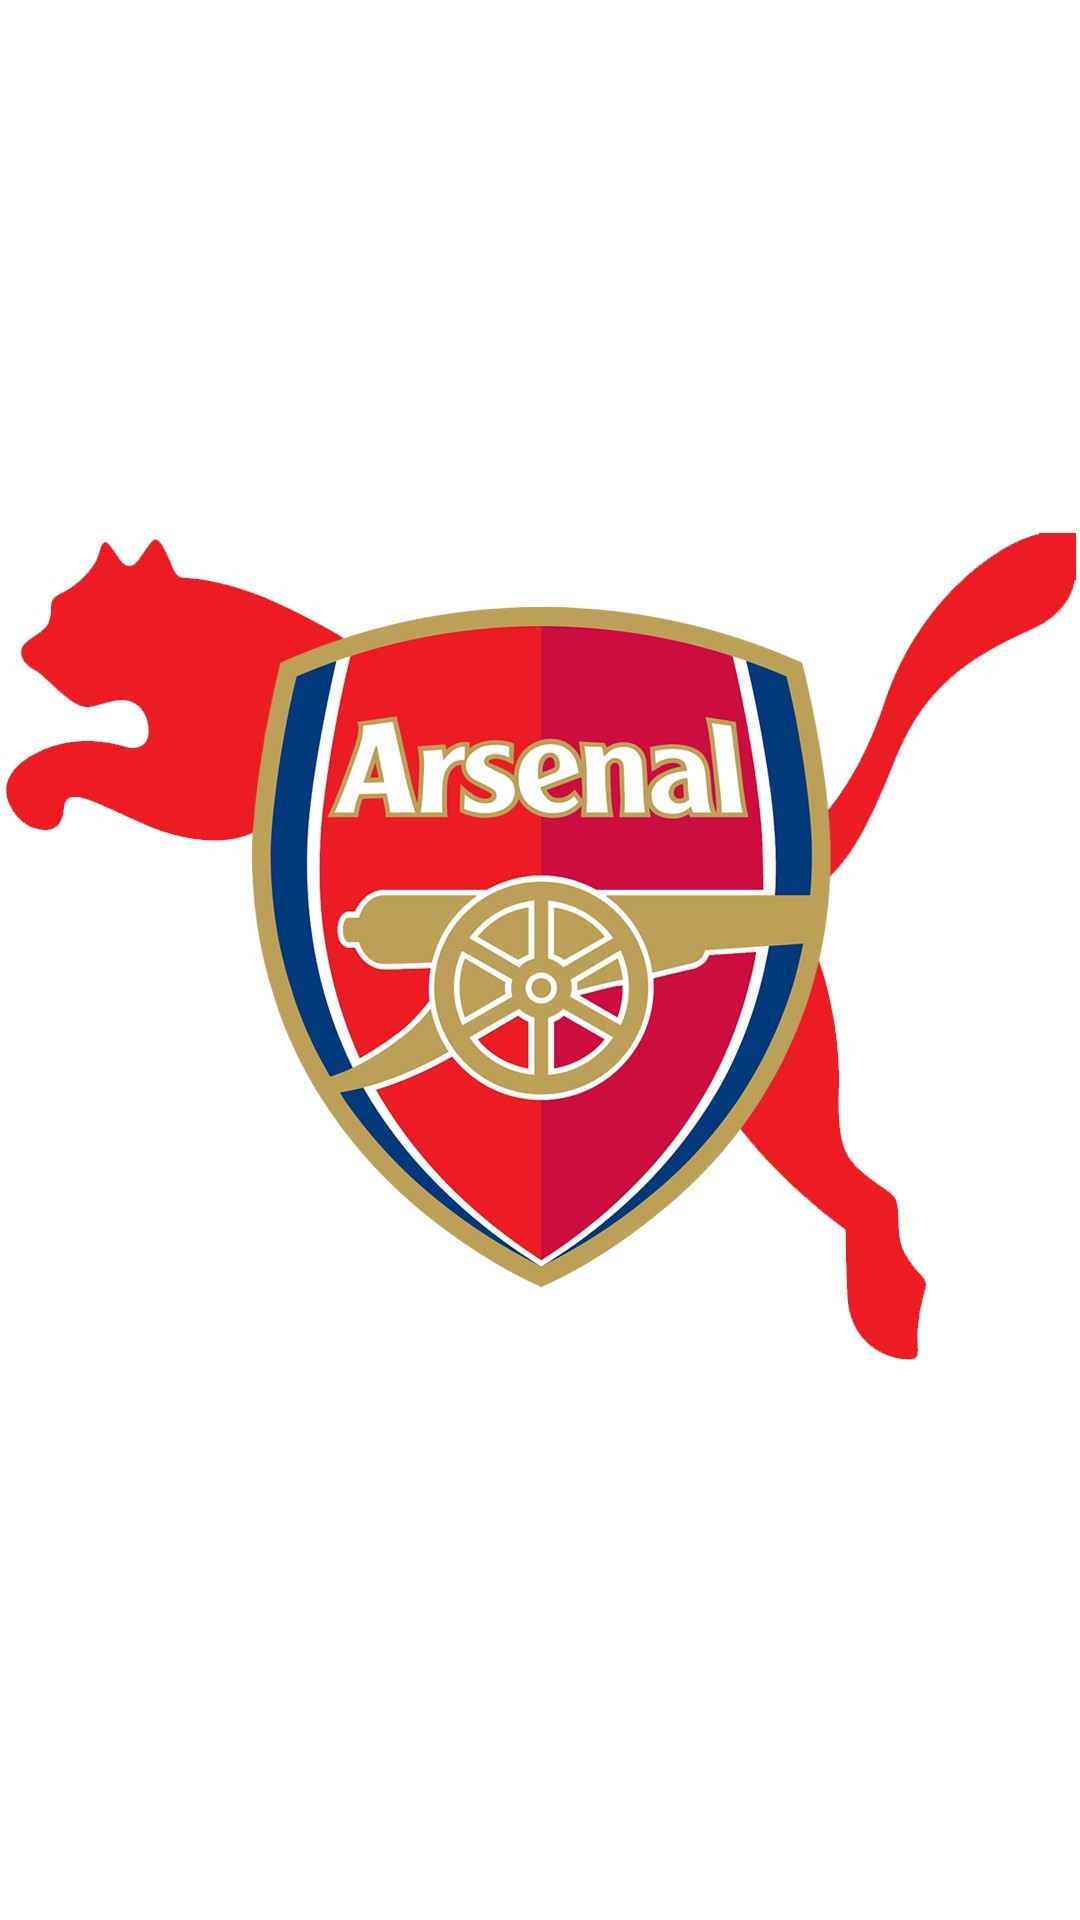 1080x1920 Source:https://pinofy.net/arsenal-iphone-wallpapers-backgrounds/white- background-arsenal-logo-picture-for-mobile/